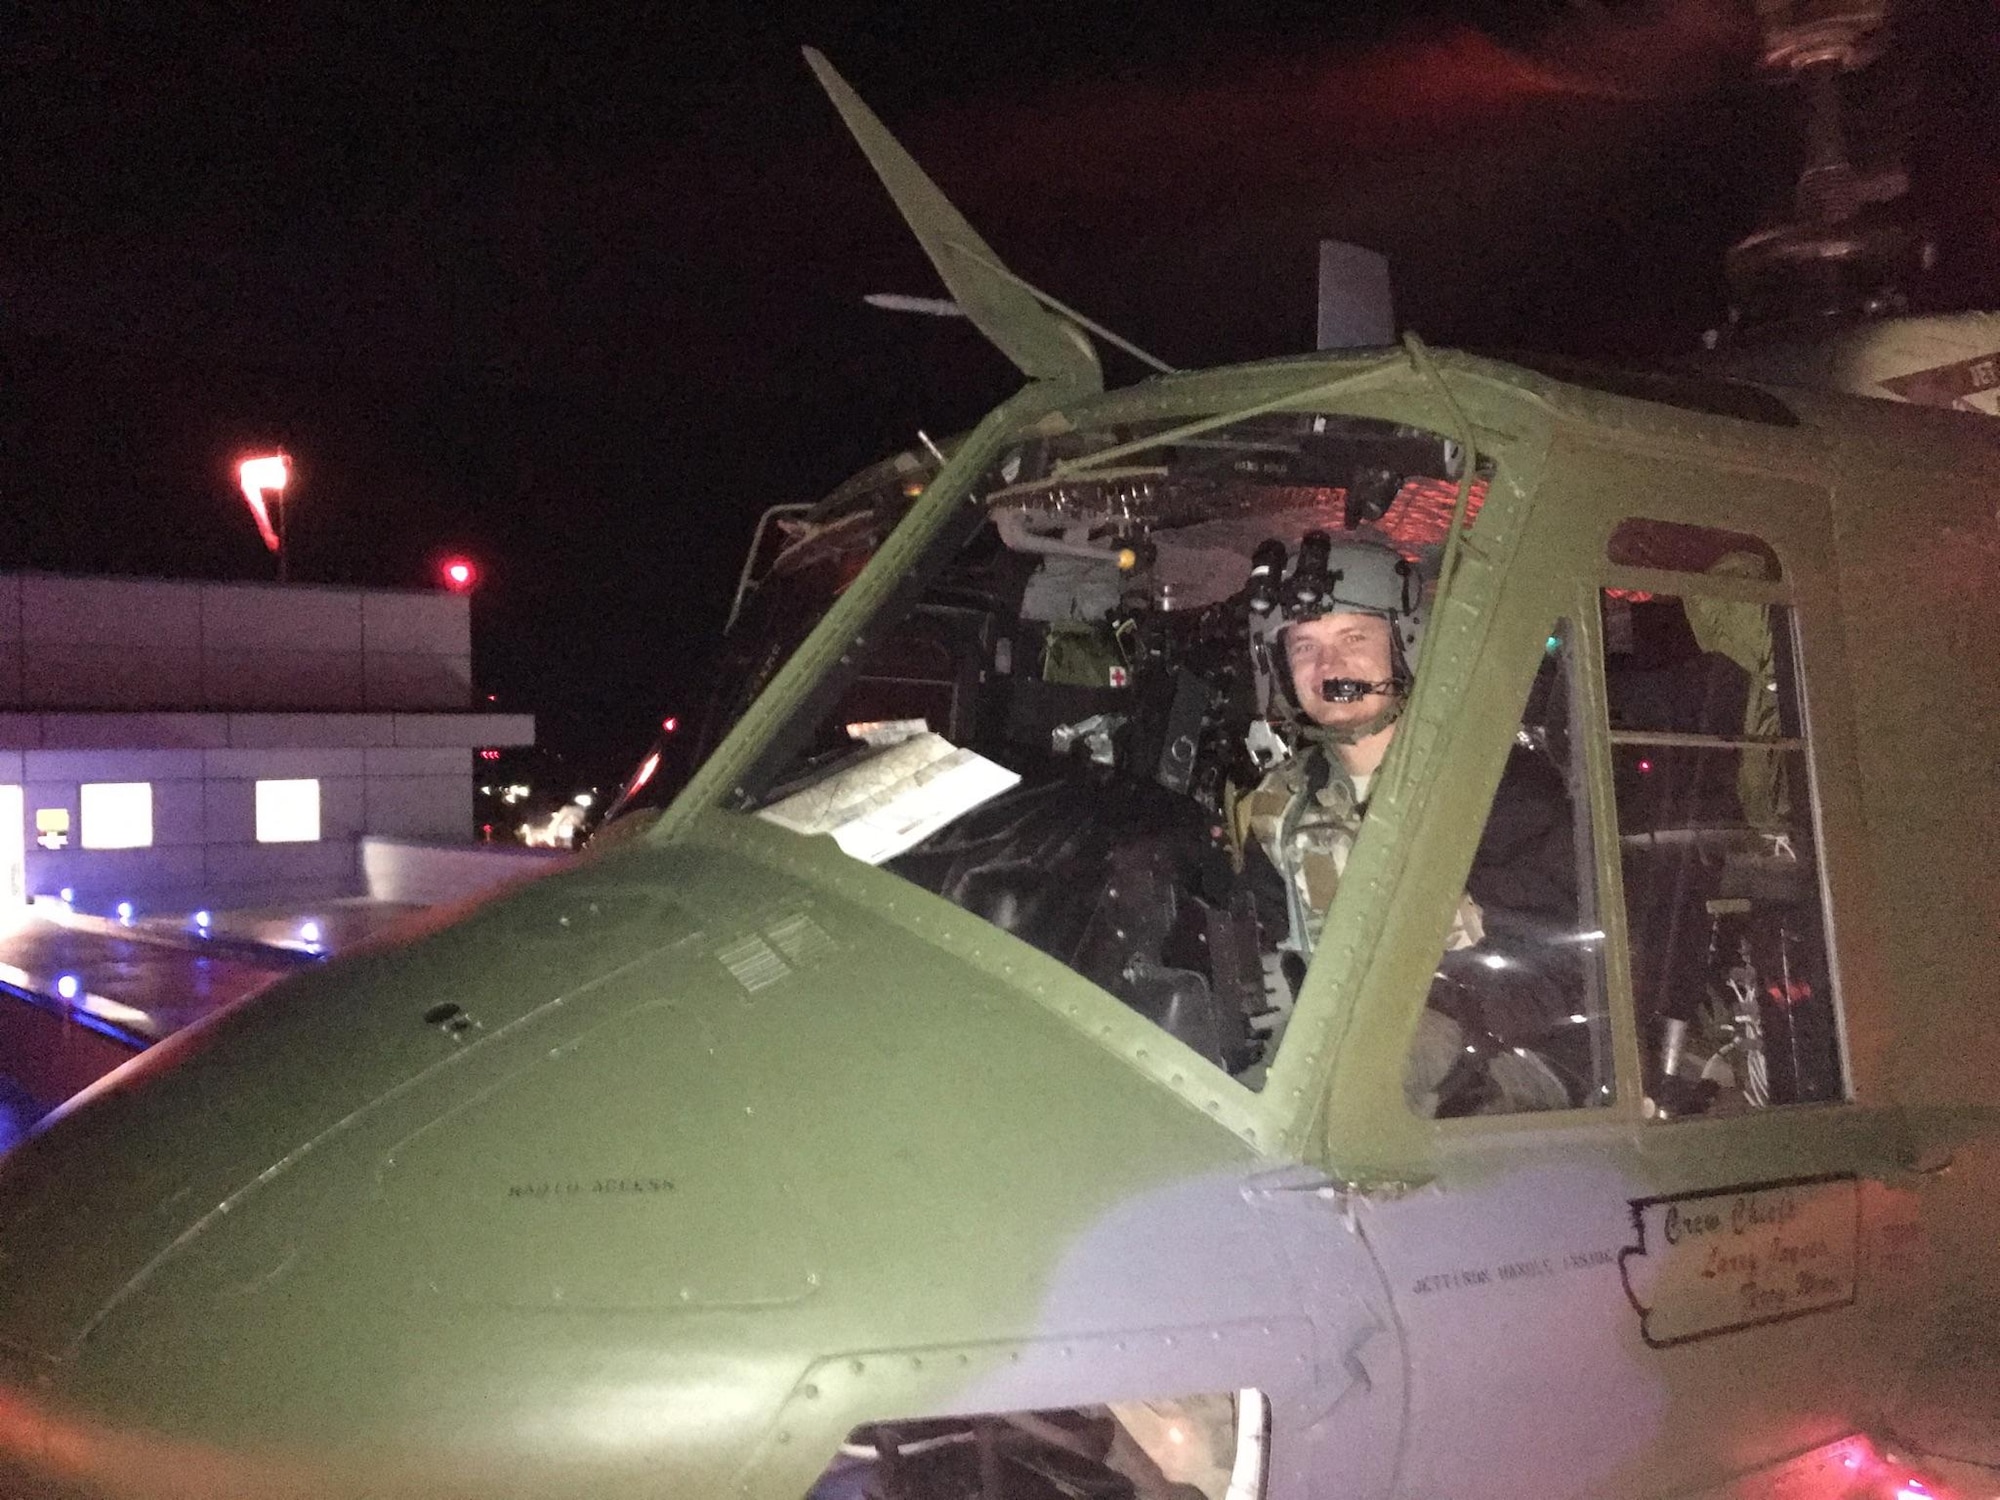 Capt. John Harris, co-pilot of the rescue mission, sits in a UH-1N Iroquois helicopter Oct. 10, 2016, at Kootenai Medical Center, Coeur d’Alene, Idaho. Harris and three other Airmen were part of a rescue mission to save an injured hunter from the side of a steep ravine. (Courtesy photo)